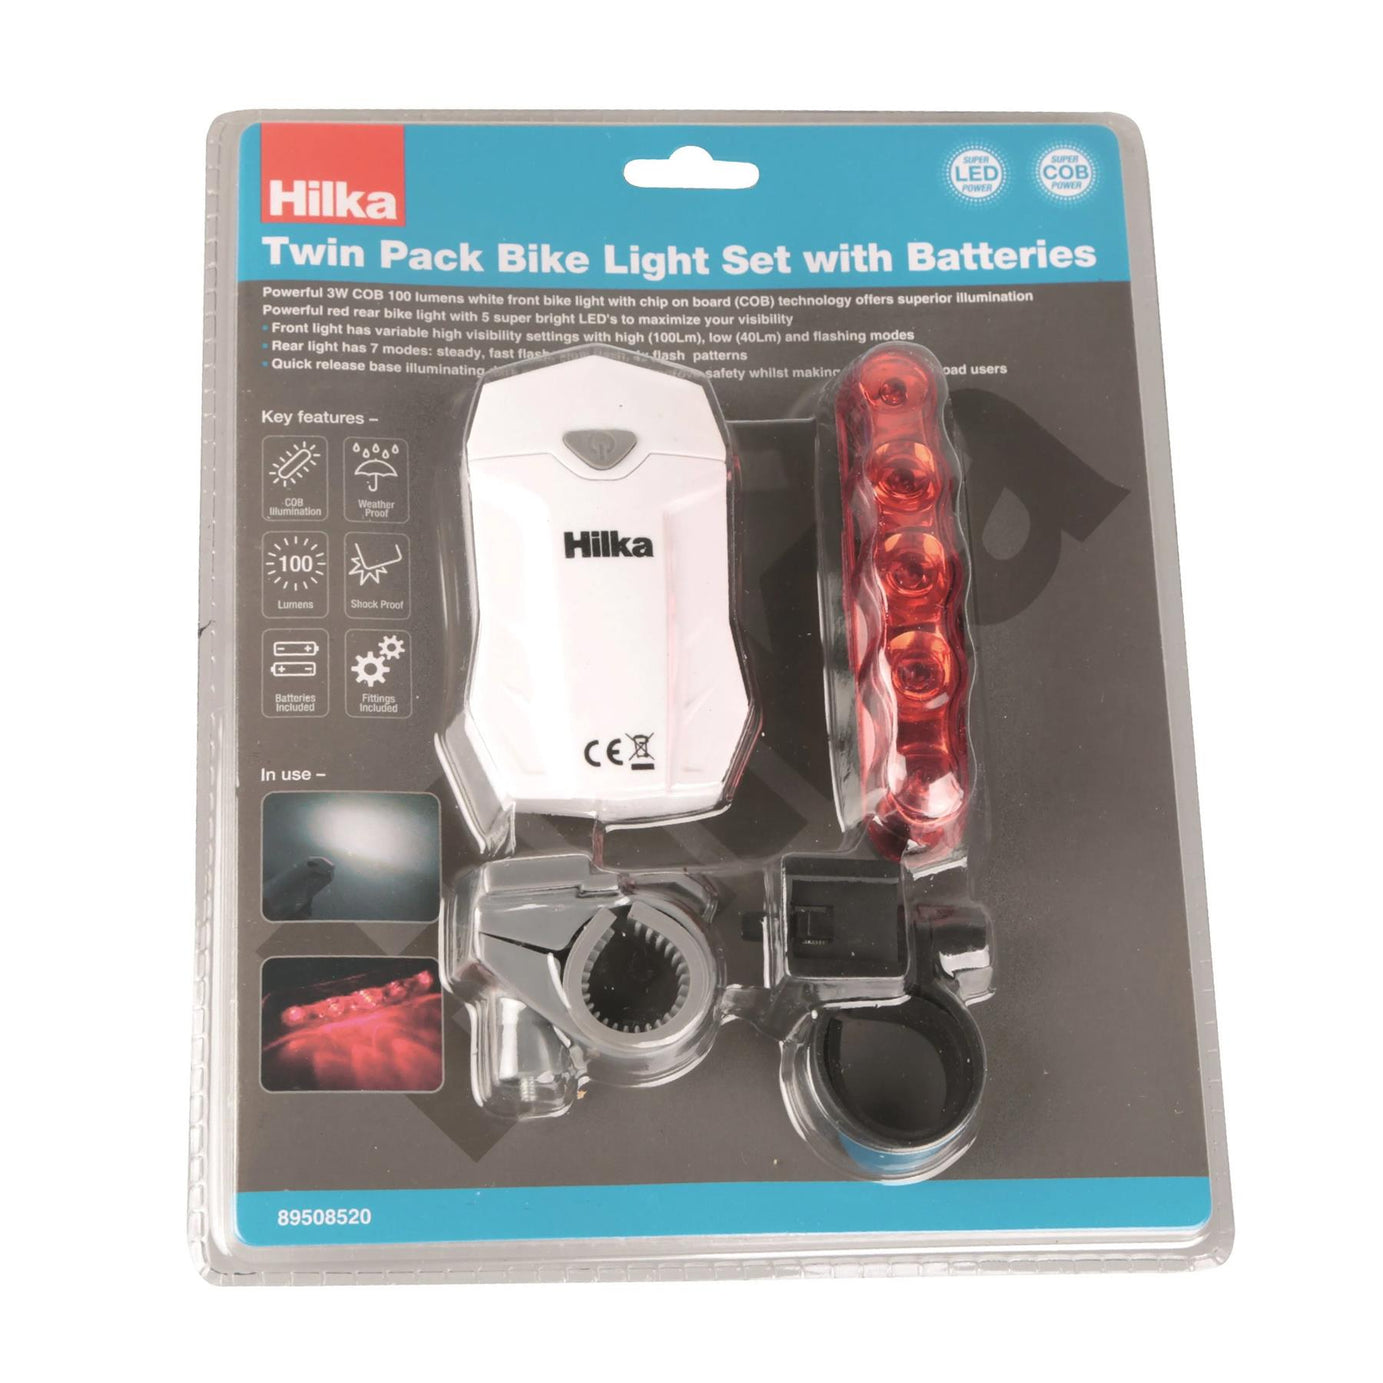 Hilka Twin Pack Bike Light Set Quick release base with Batteries